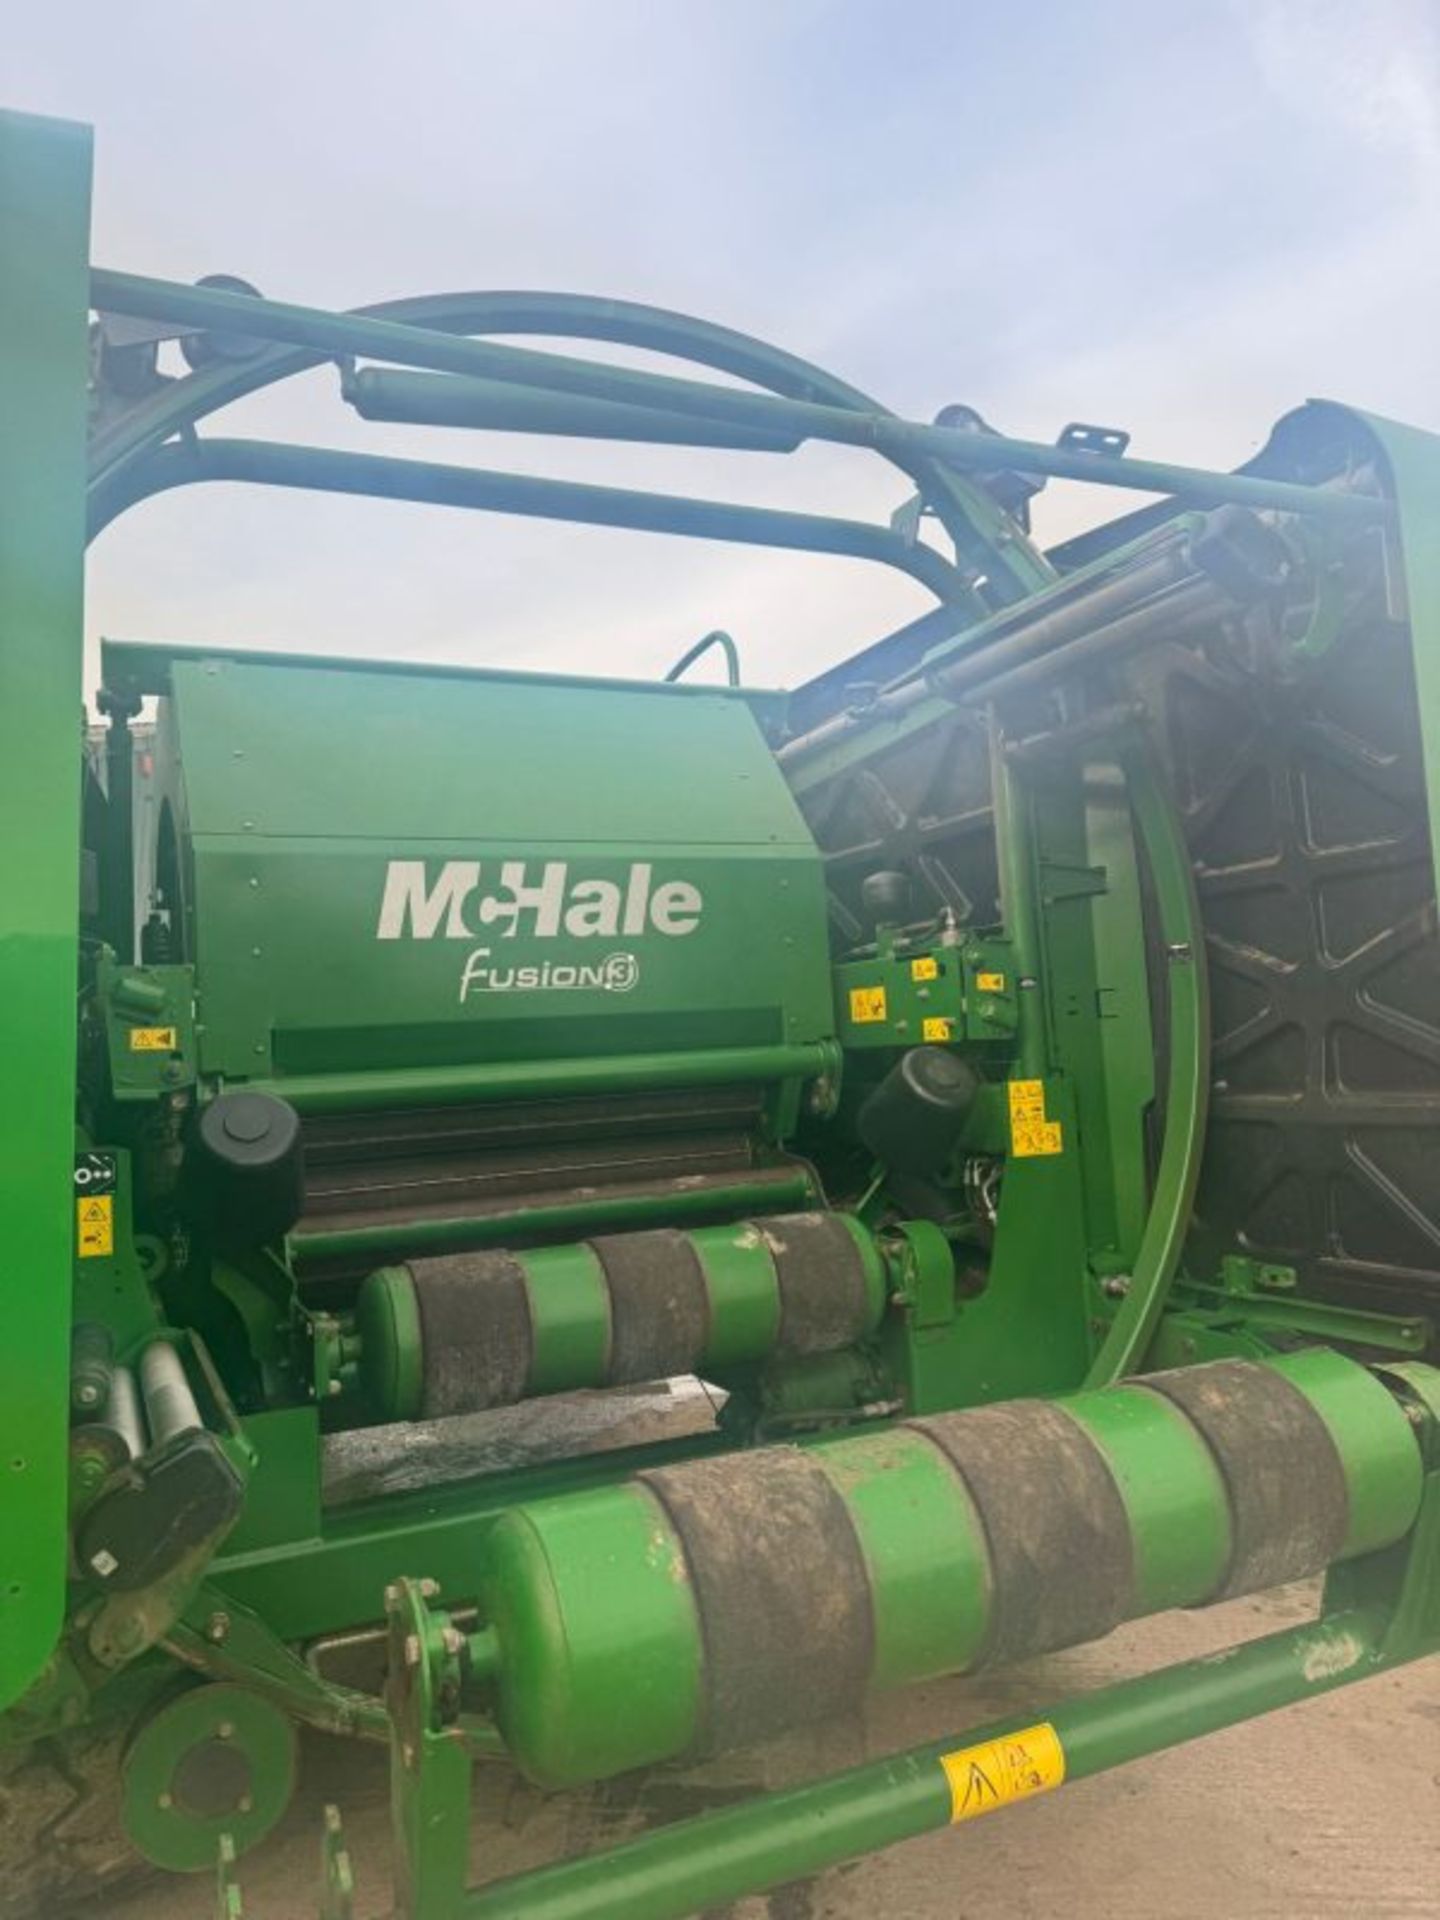 MCHALE FUSION 3 BALER WRAPPER COMBINATION - 2016 - Image 9 of 15